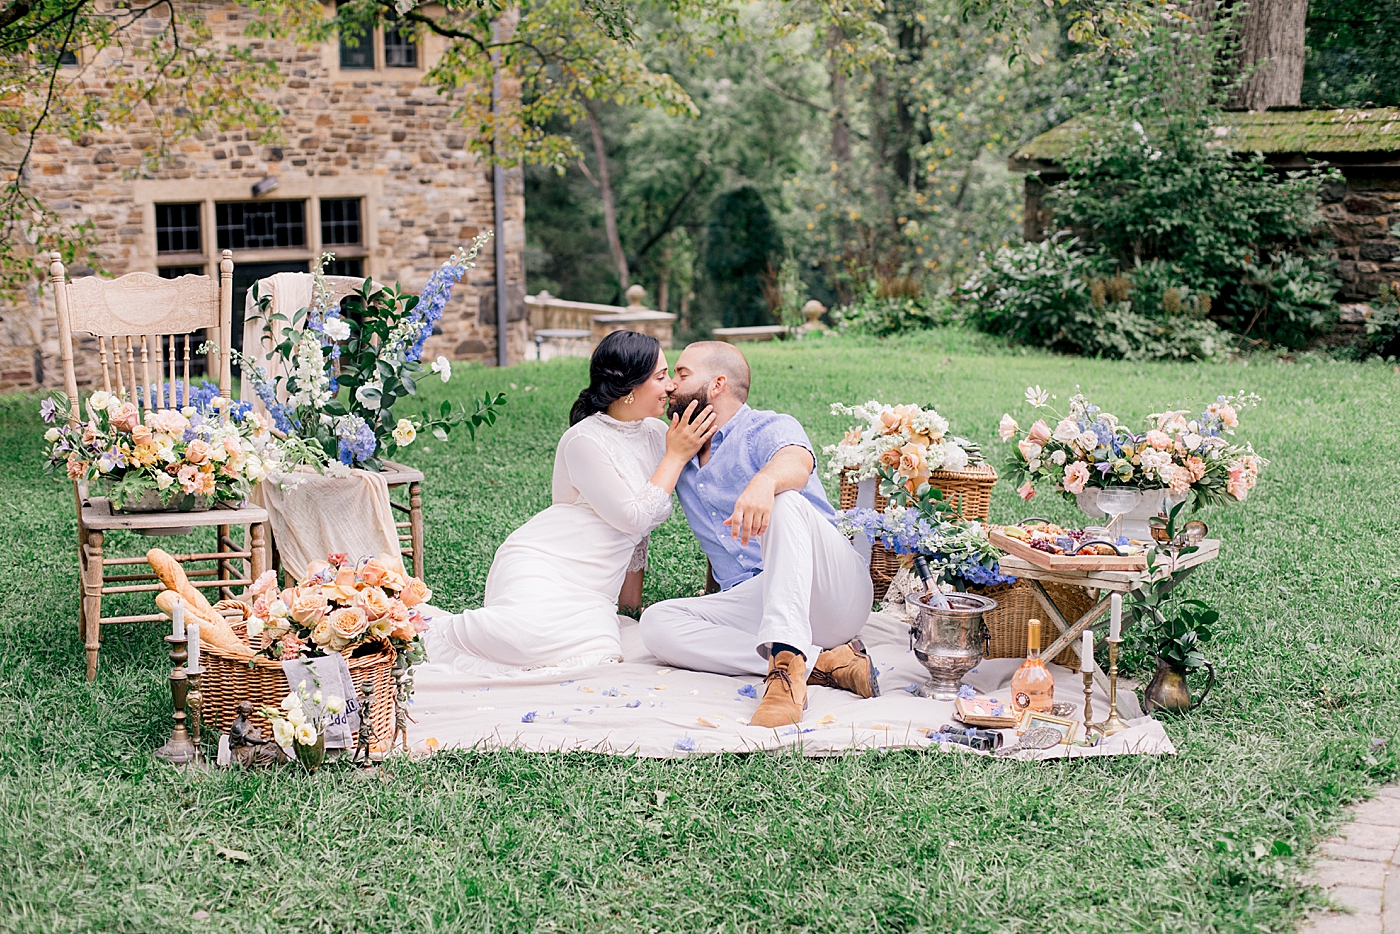 Bride and groom sitting on a picnic blanket surrounded by florals | Image by Hope Helmuth Photography